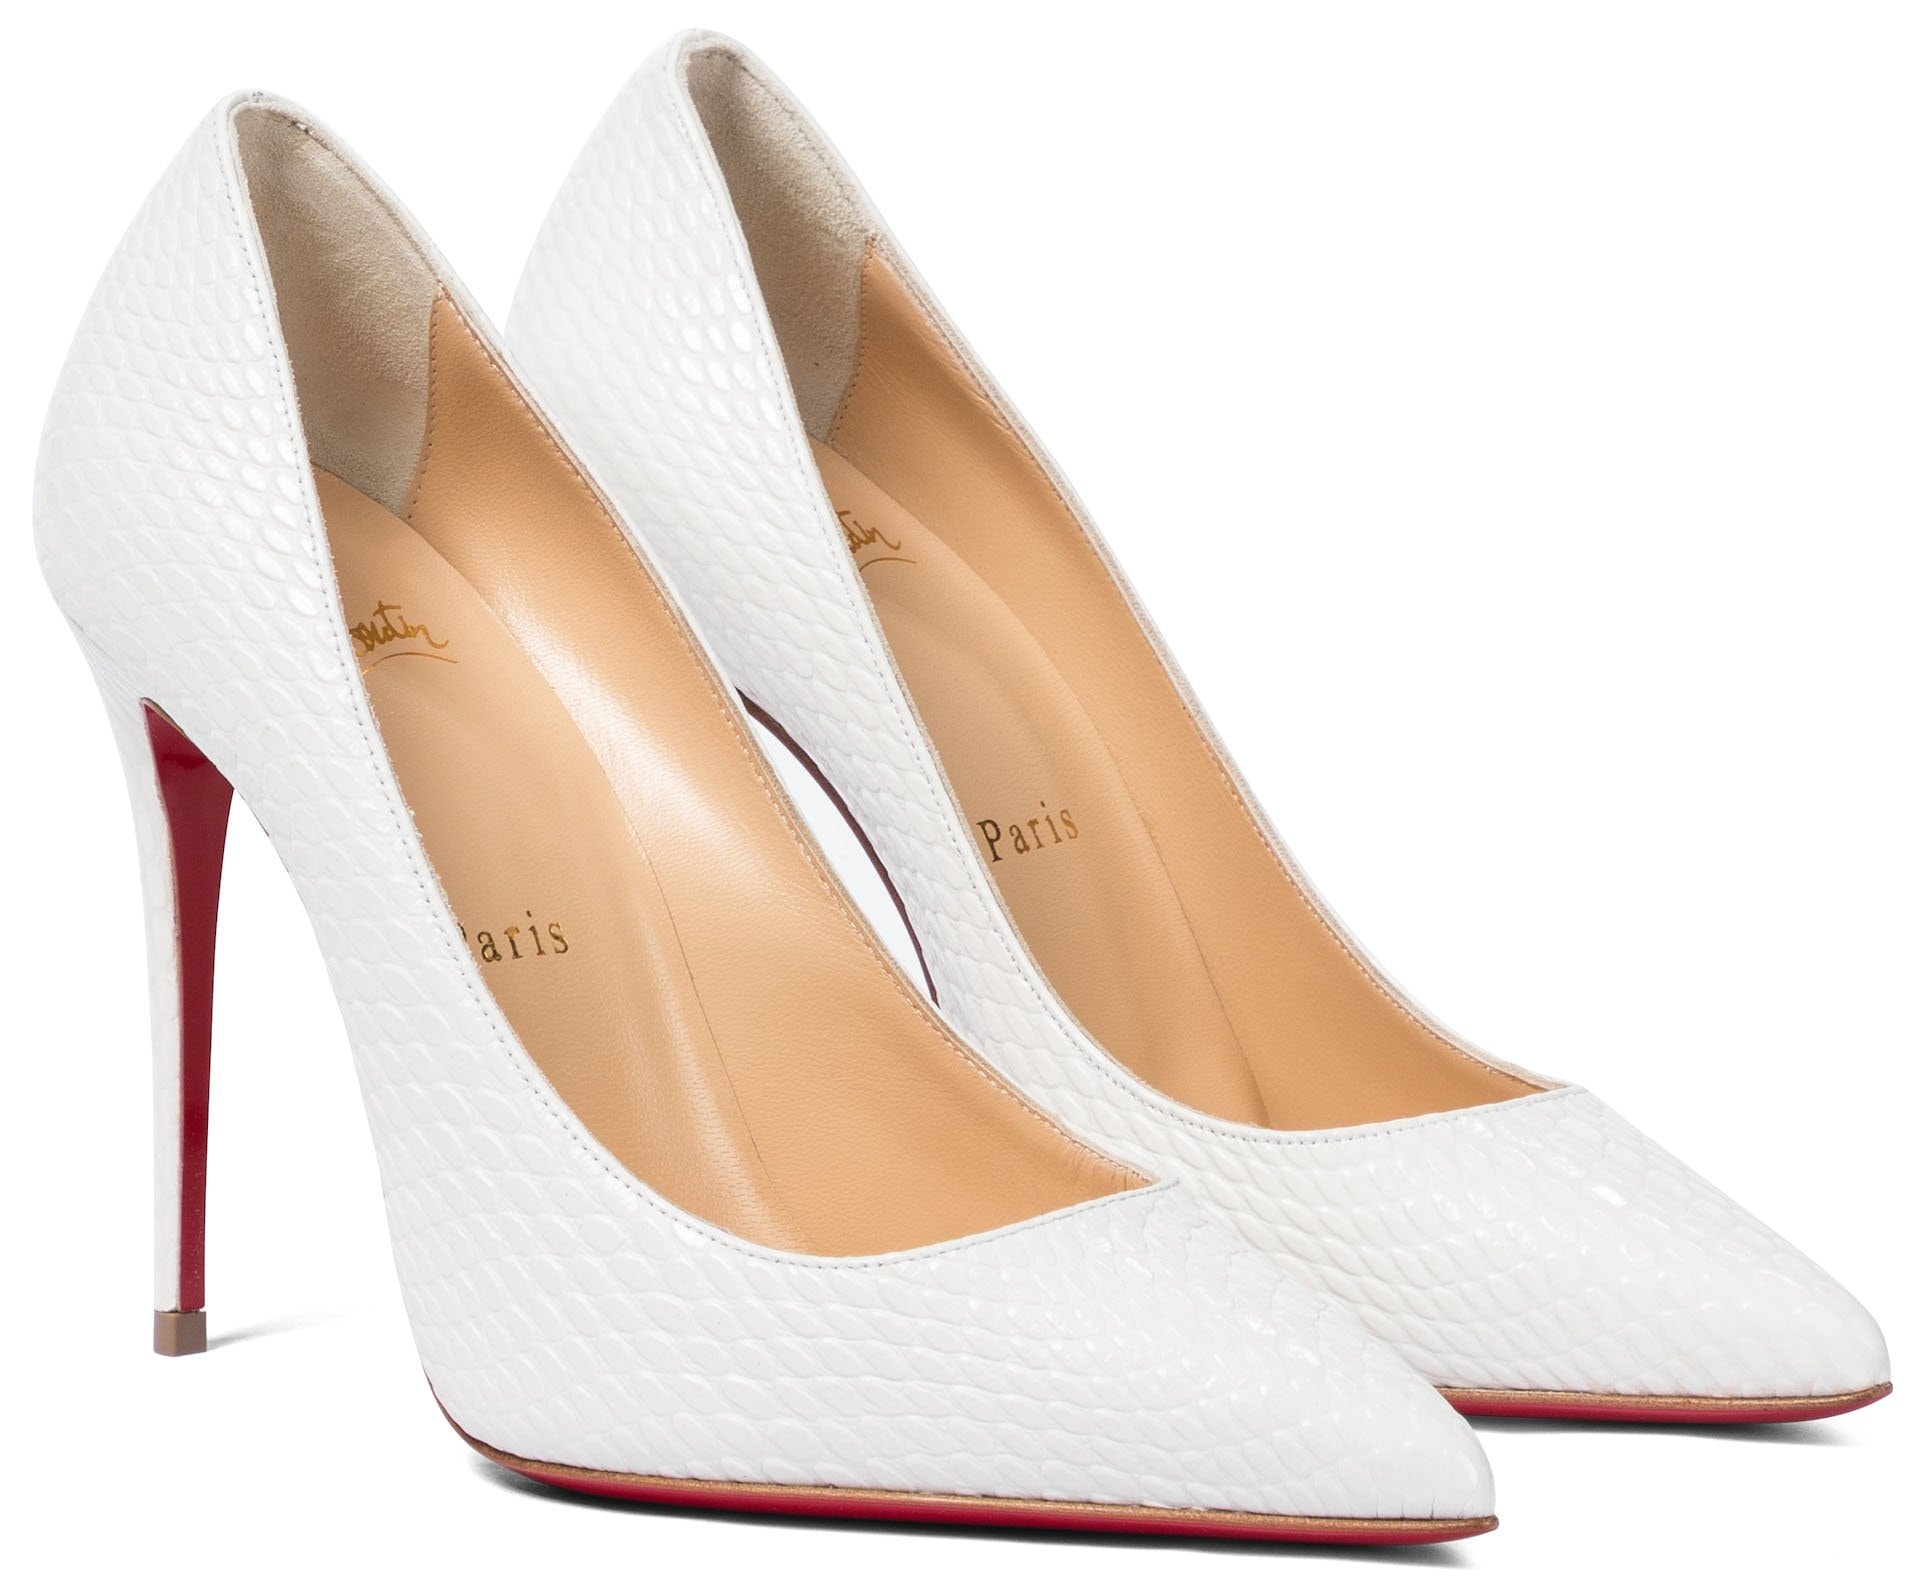 An iconic Louboutin silhouette, these Kate pumps are timeless in pristine white snake-embossed leather